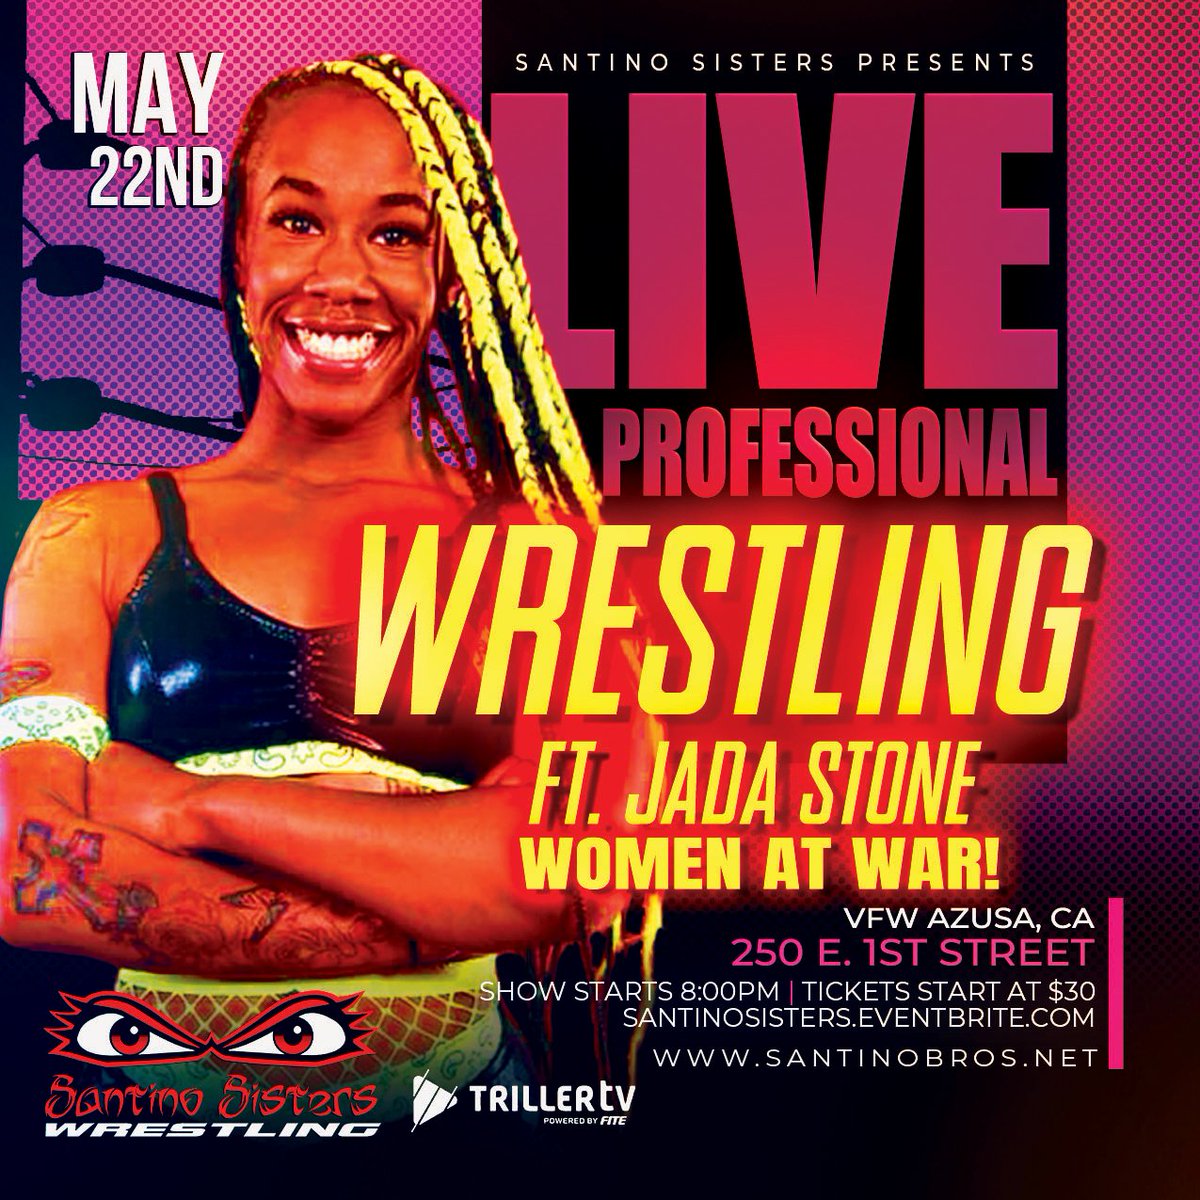 📢 TALENT ANNOUNCEMENT 🚨 𝙅𝘼𝘿𝘼 𝙎𝙏𝙊𝙉𝙀 𝘿𝙀𝘽𝙐𝙏𝙎! 🔥 WOMEN AT WAR! 📅 WEDNESDAY May 22nd at 8pm 📍 VFW, Azusa, CA. 91702 🎟️ SantinoSisters.eventbrite.com 📺 Streaming on #TrillerTV trillertv.com/vl/p/santino-b…